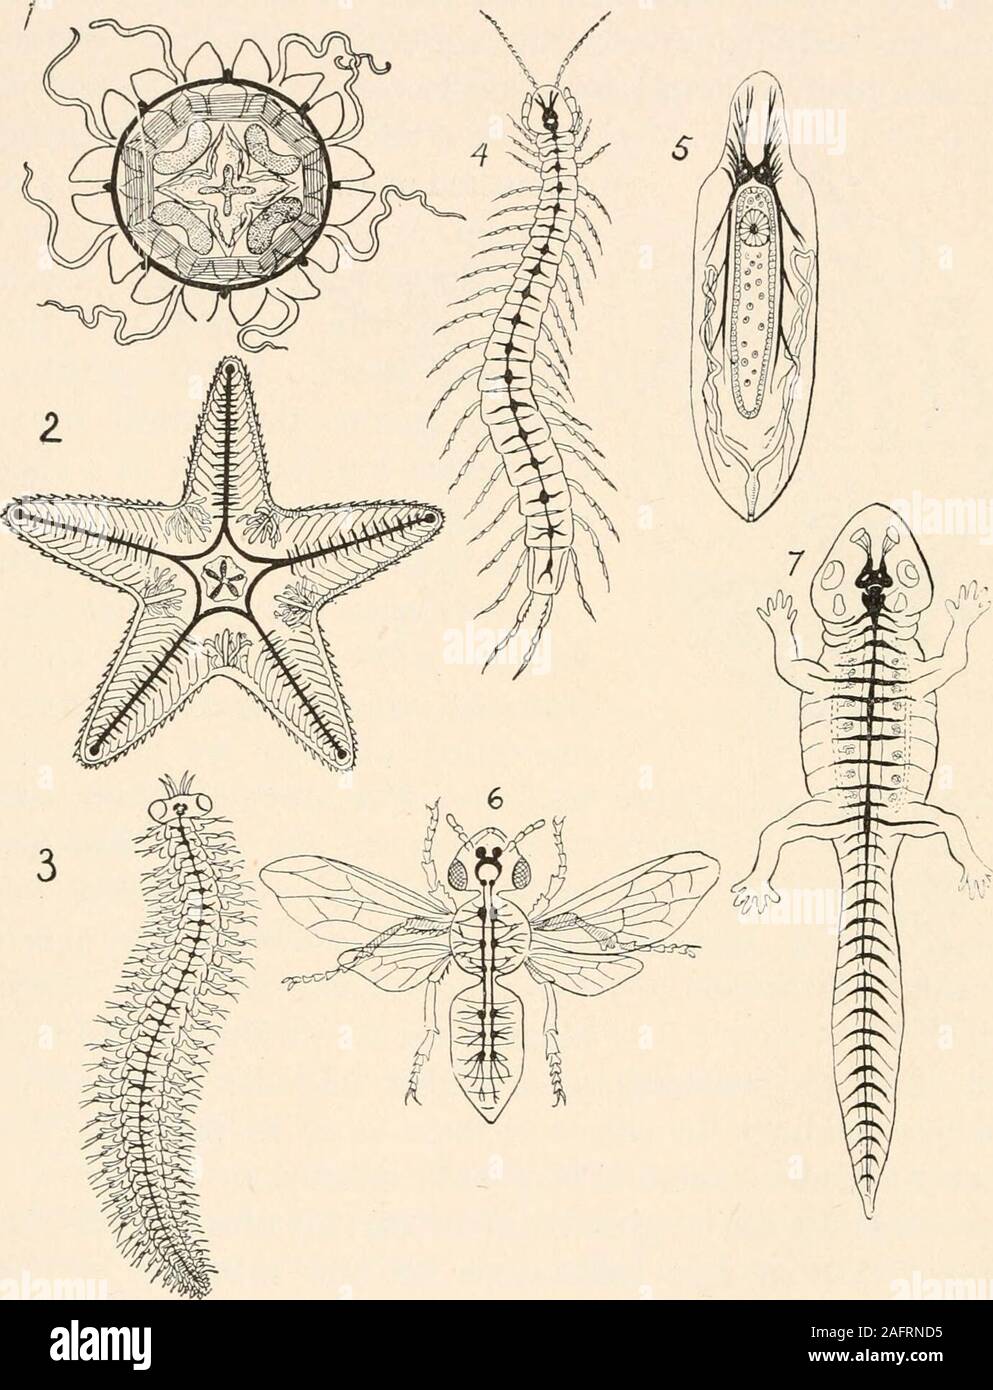 The animans and man; an elementary textbook of zoology and human physiology.  68 THE ANIMALS AND MAN. FIG. 26. Diagrams showing fundamental structure of  types of severalanimal phyla: 1, sea-anemone; 2,